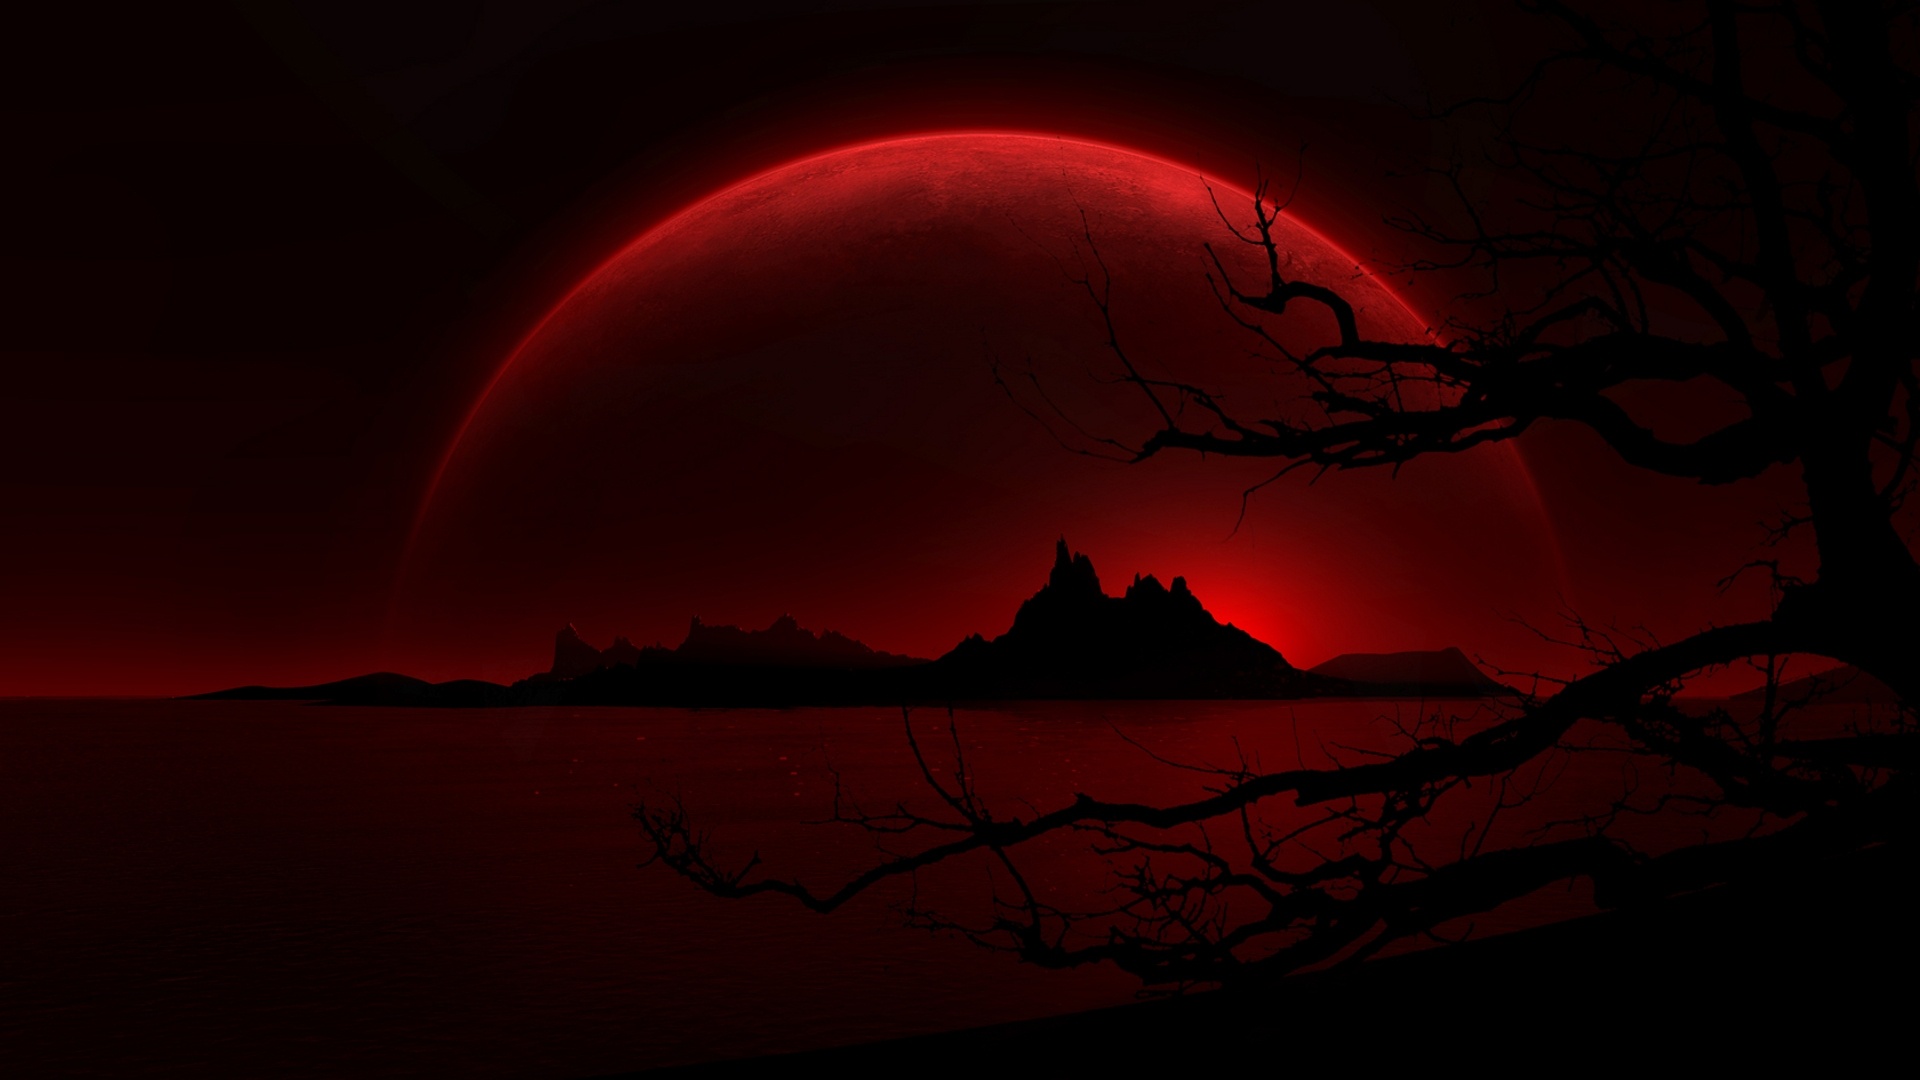 Black And Red Landscape - 1920x1080 Wallpaper 